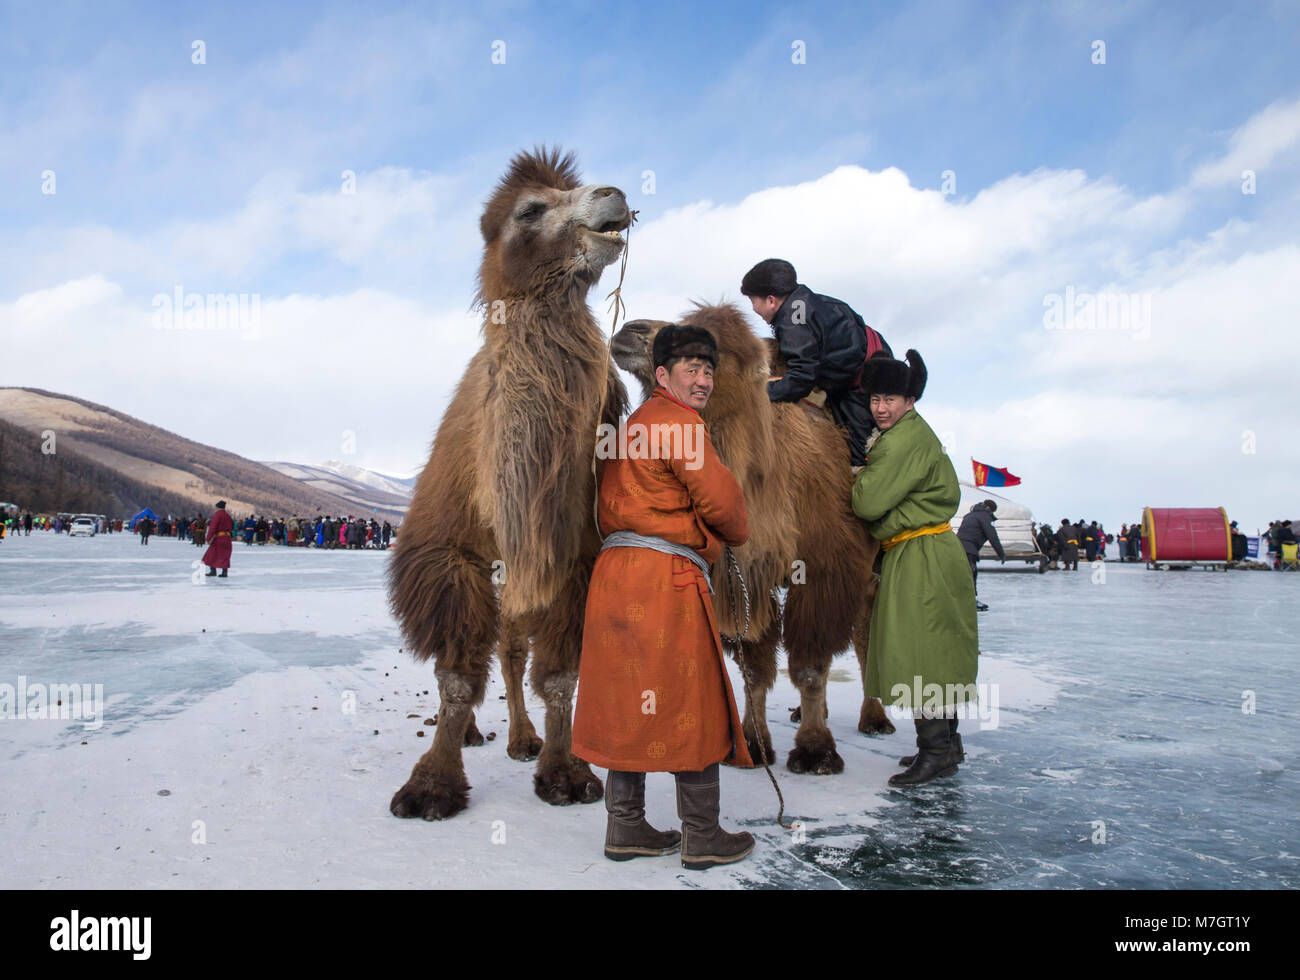 Hatgal, Mongolia, 3rd March 2018: mongolian people on a frozen lake Khuvsgul during a ice festival in winter Stock Photo